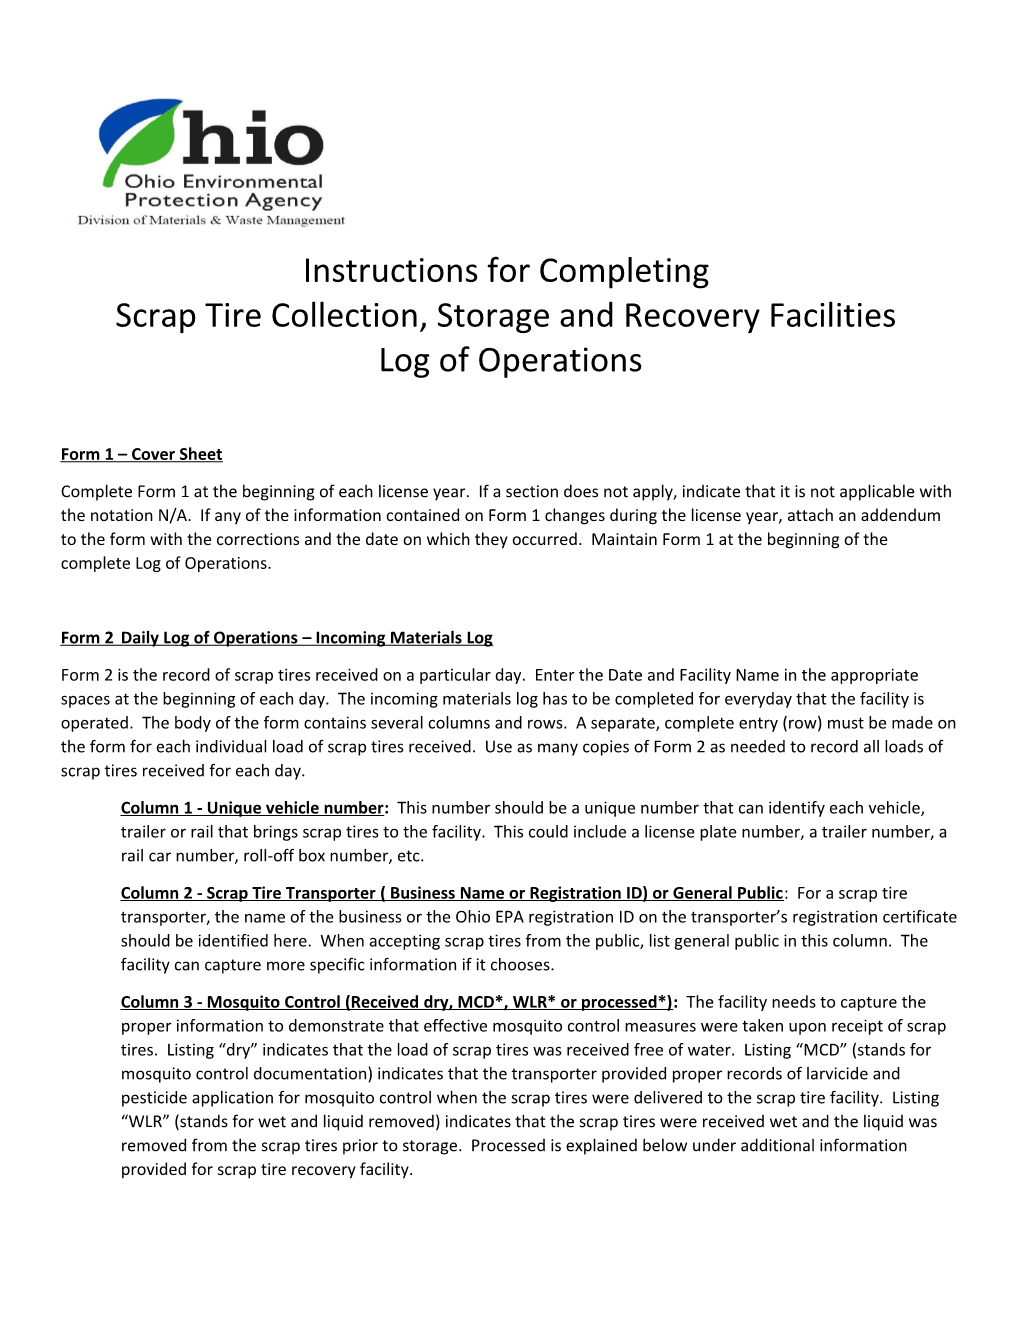 Scrap Tire Collection, Storage and Recovery Facilities